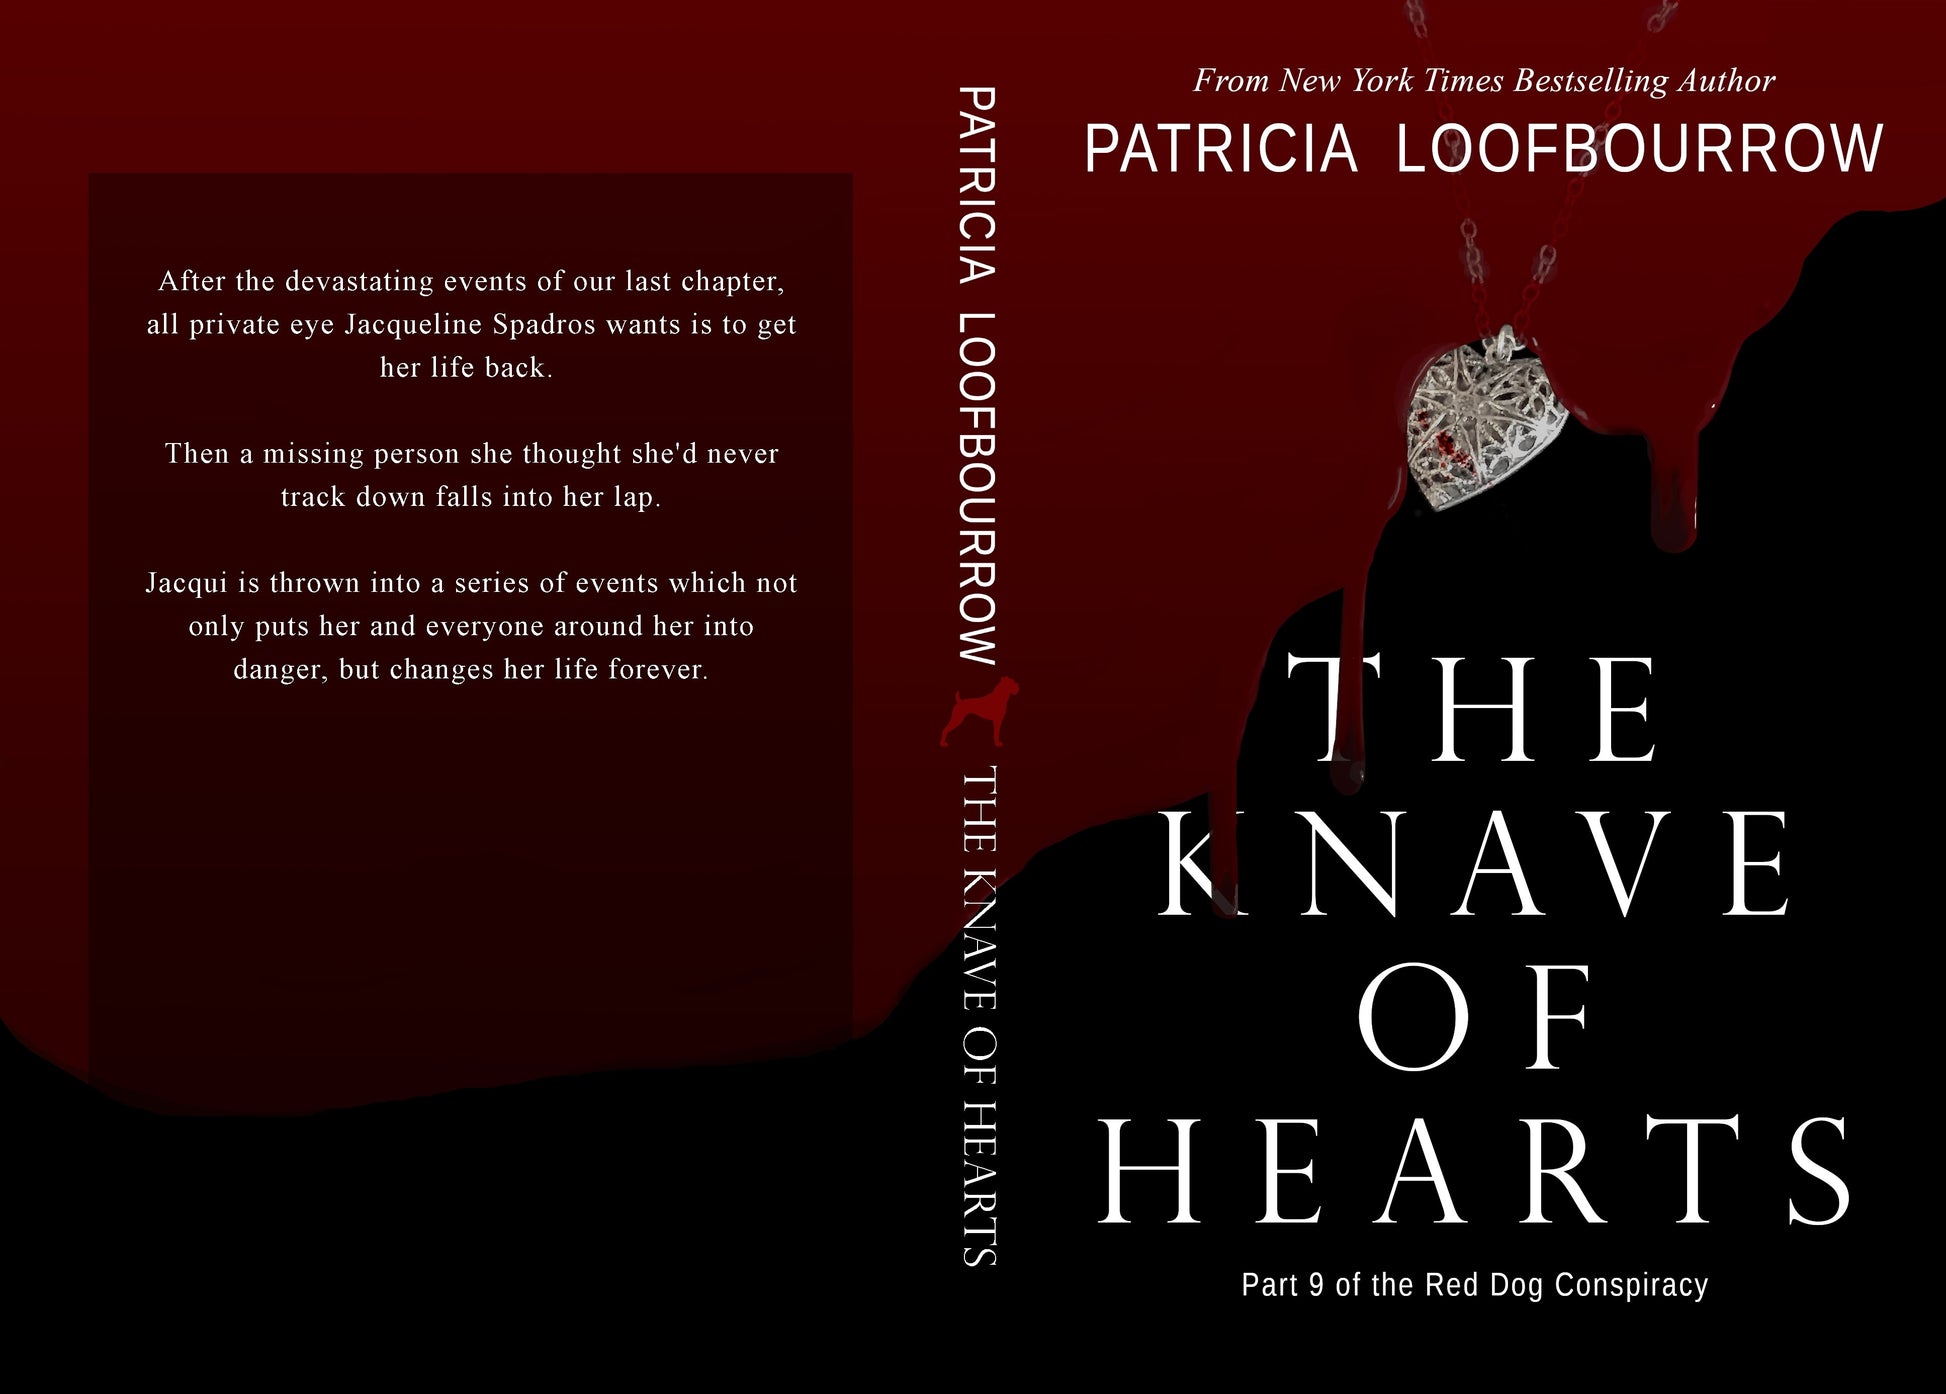 (PREORDER) The Knave of Hearts [Signed hardcover] - PatriciaLoofbourrow